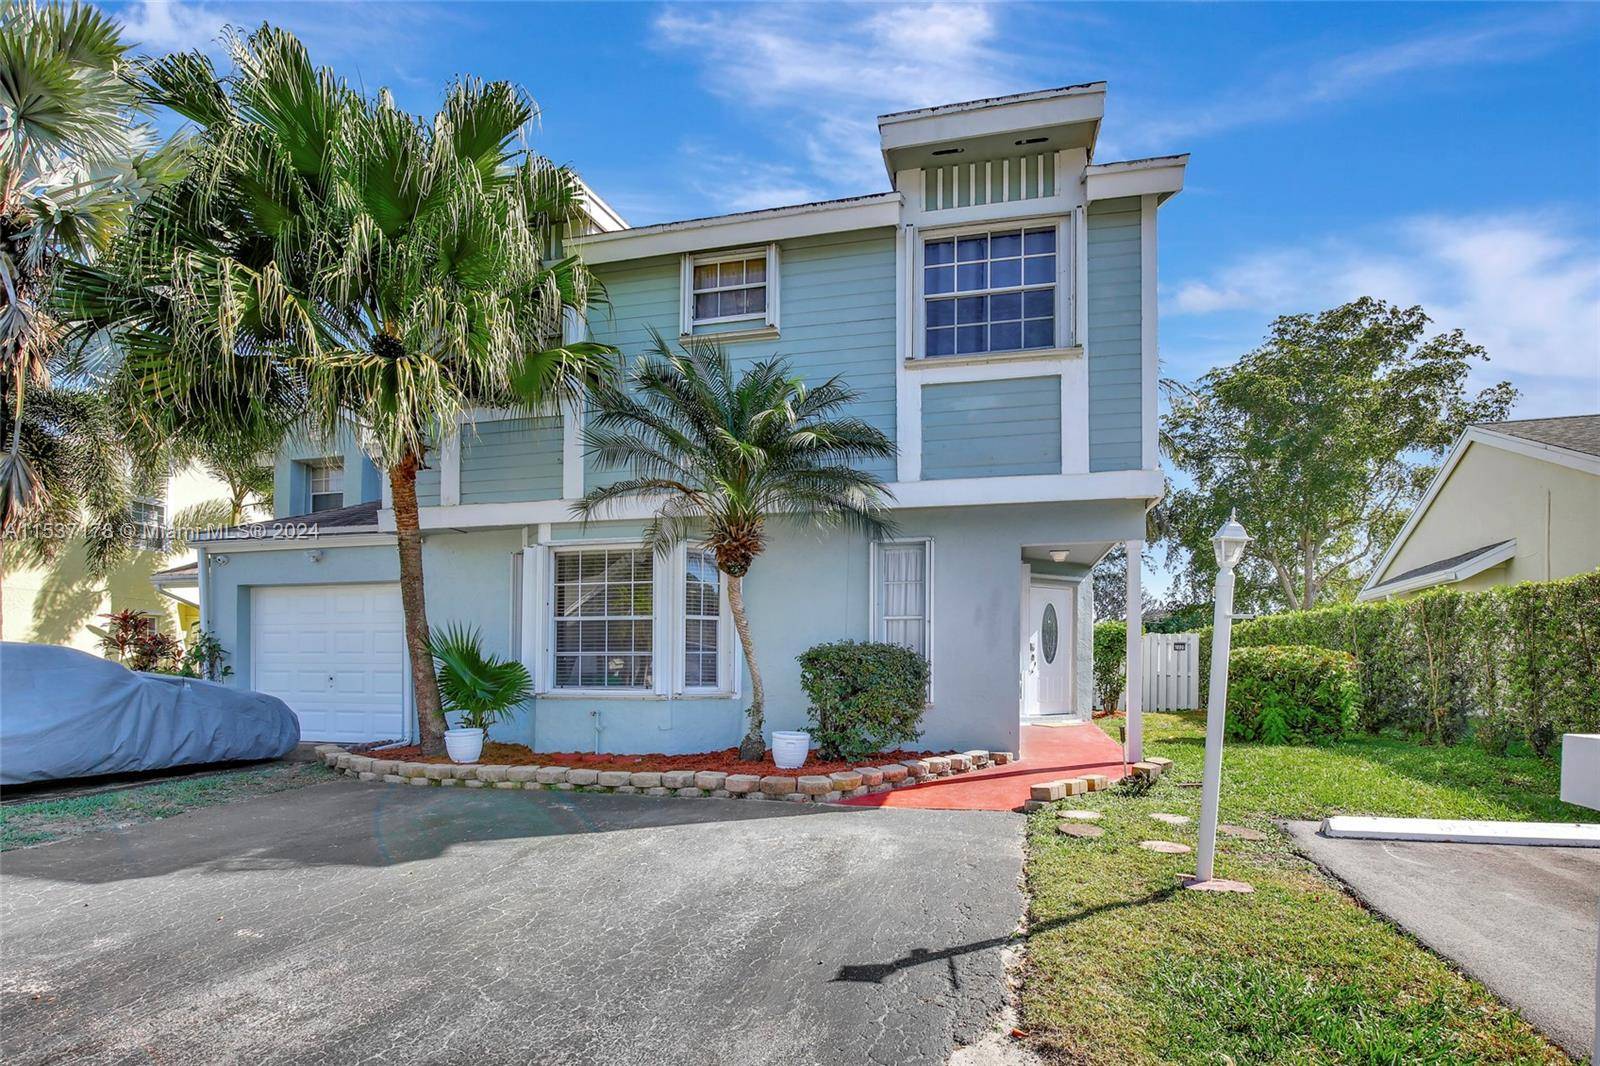 This gorgeous 3 BED 2. 5 BATH plus Office Den 4th bedroom home is located in the beautiful Scarborough community in the heart of Davie.